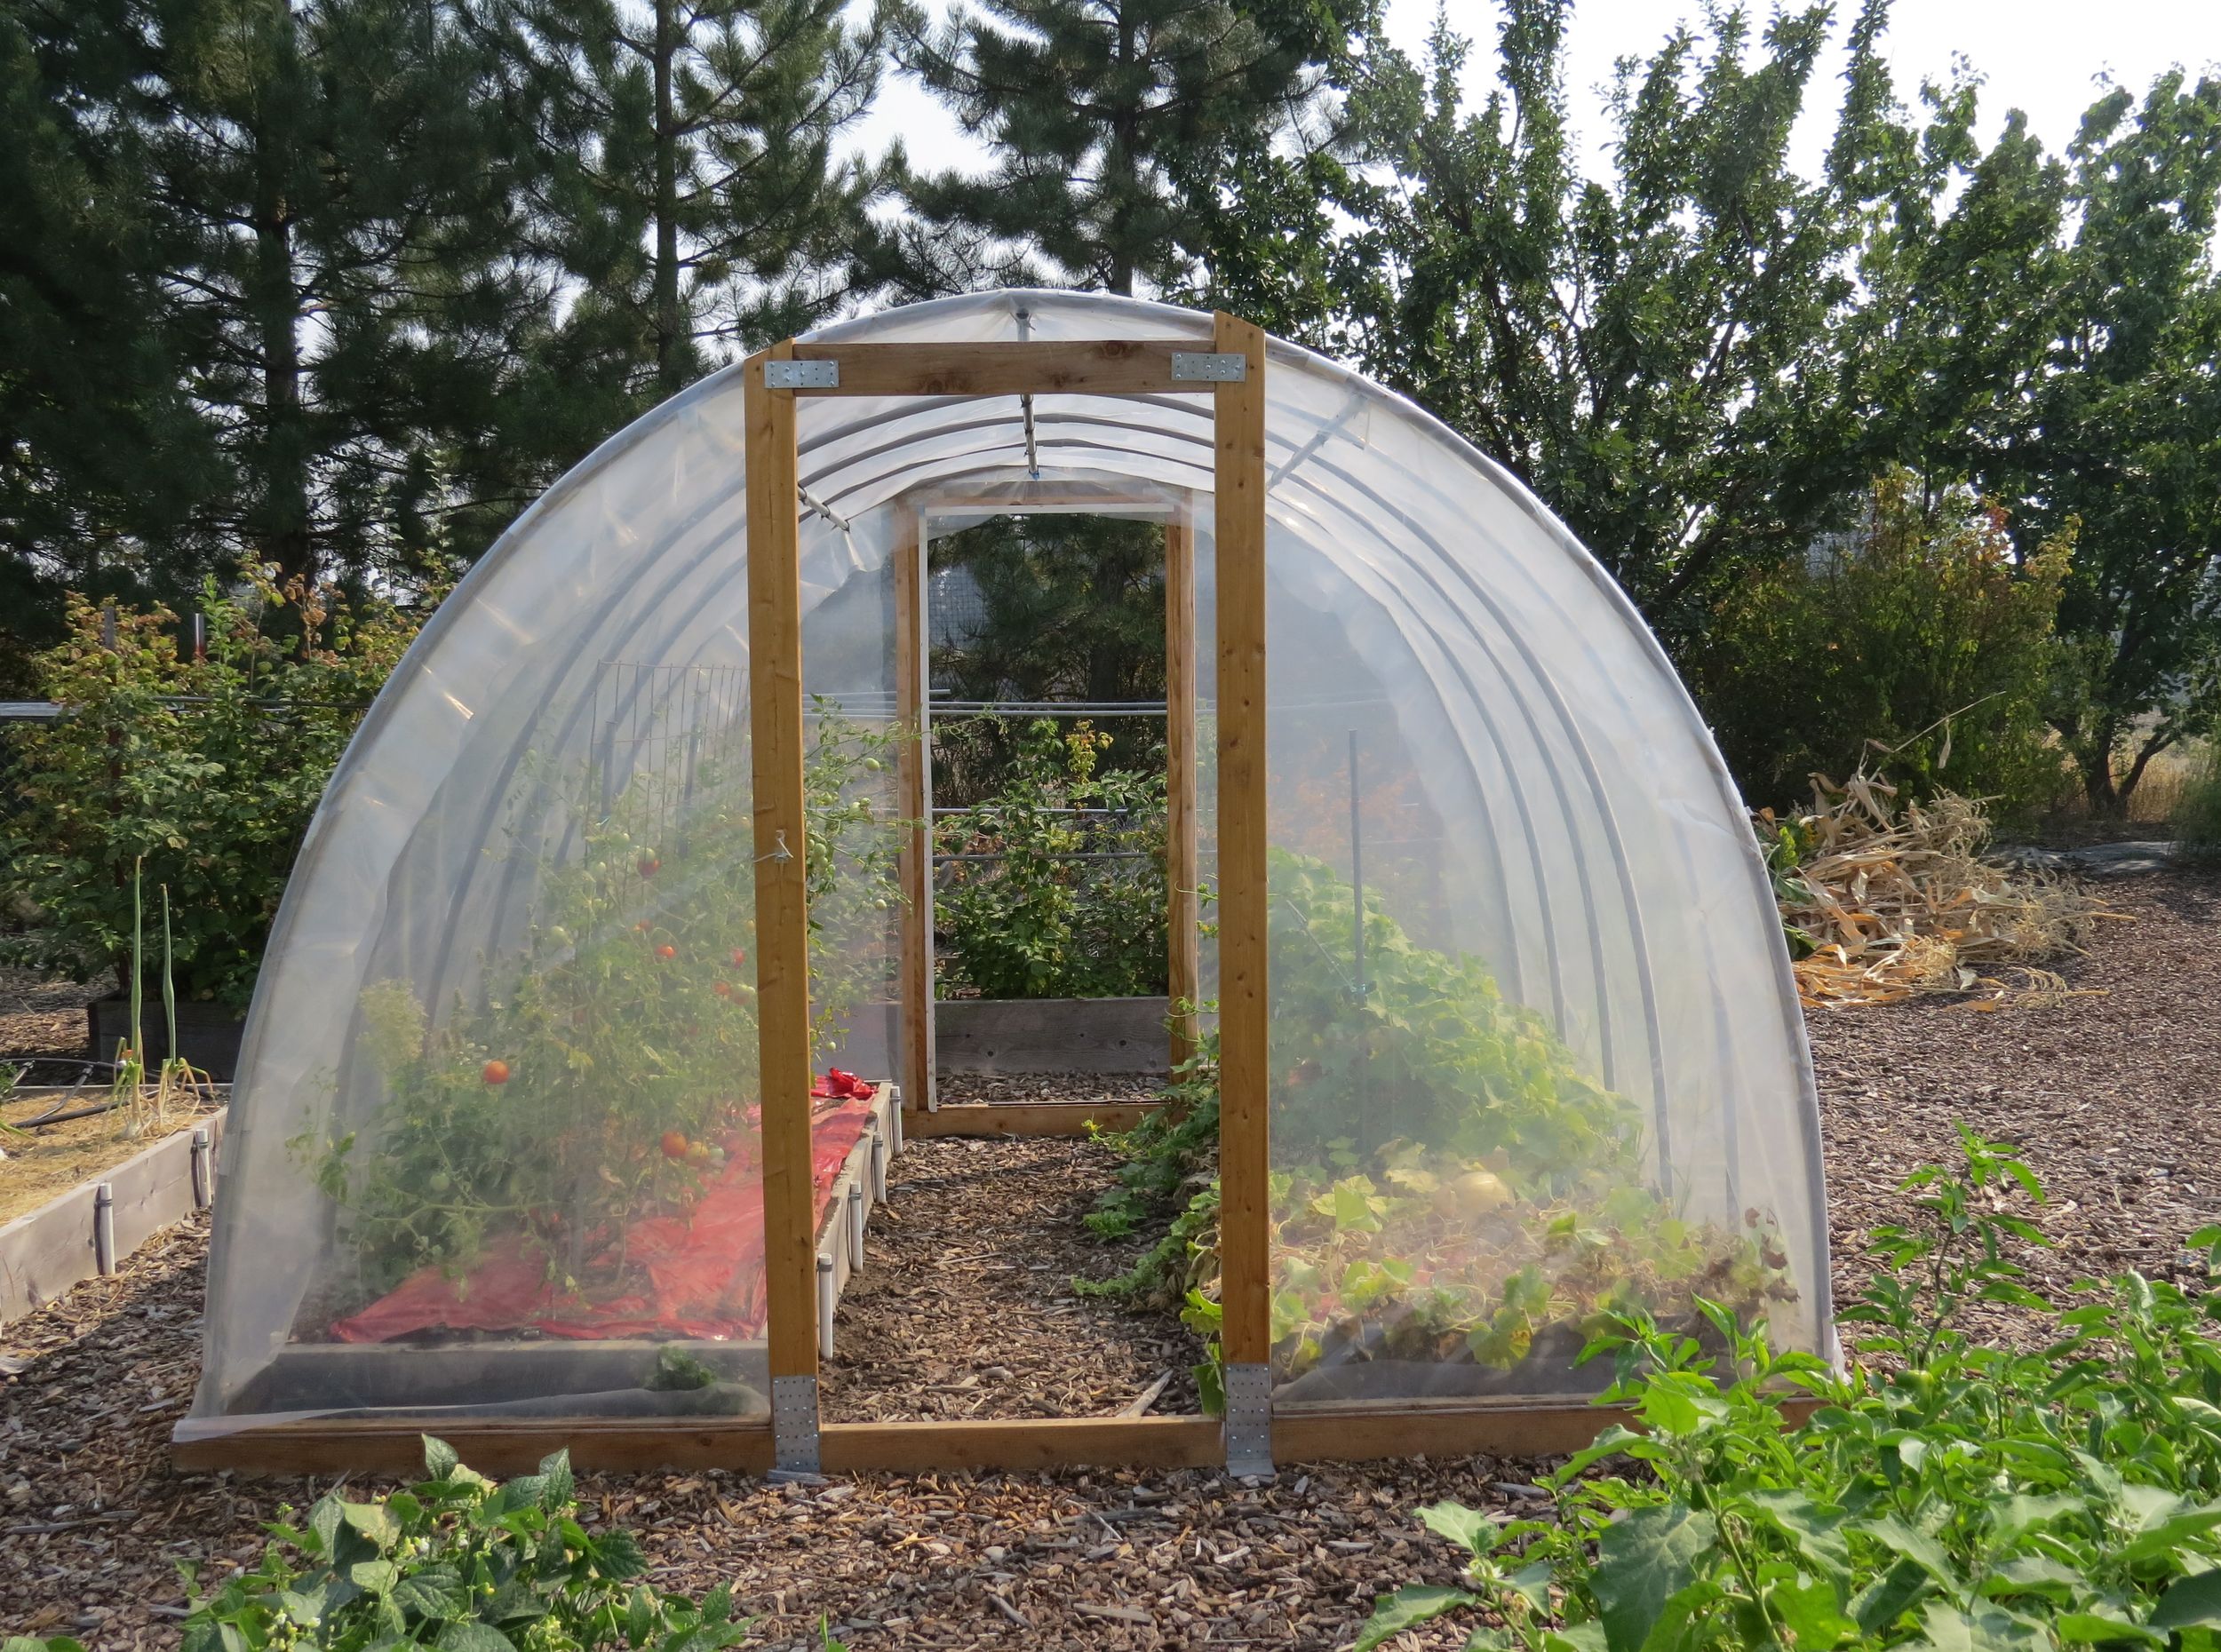 Hoop house gets year-round use | The Spokesman-Review